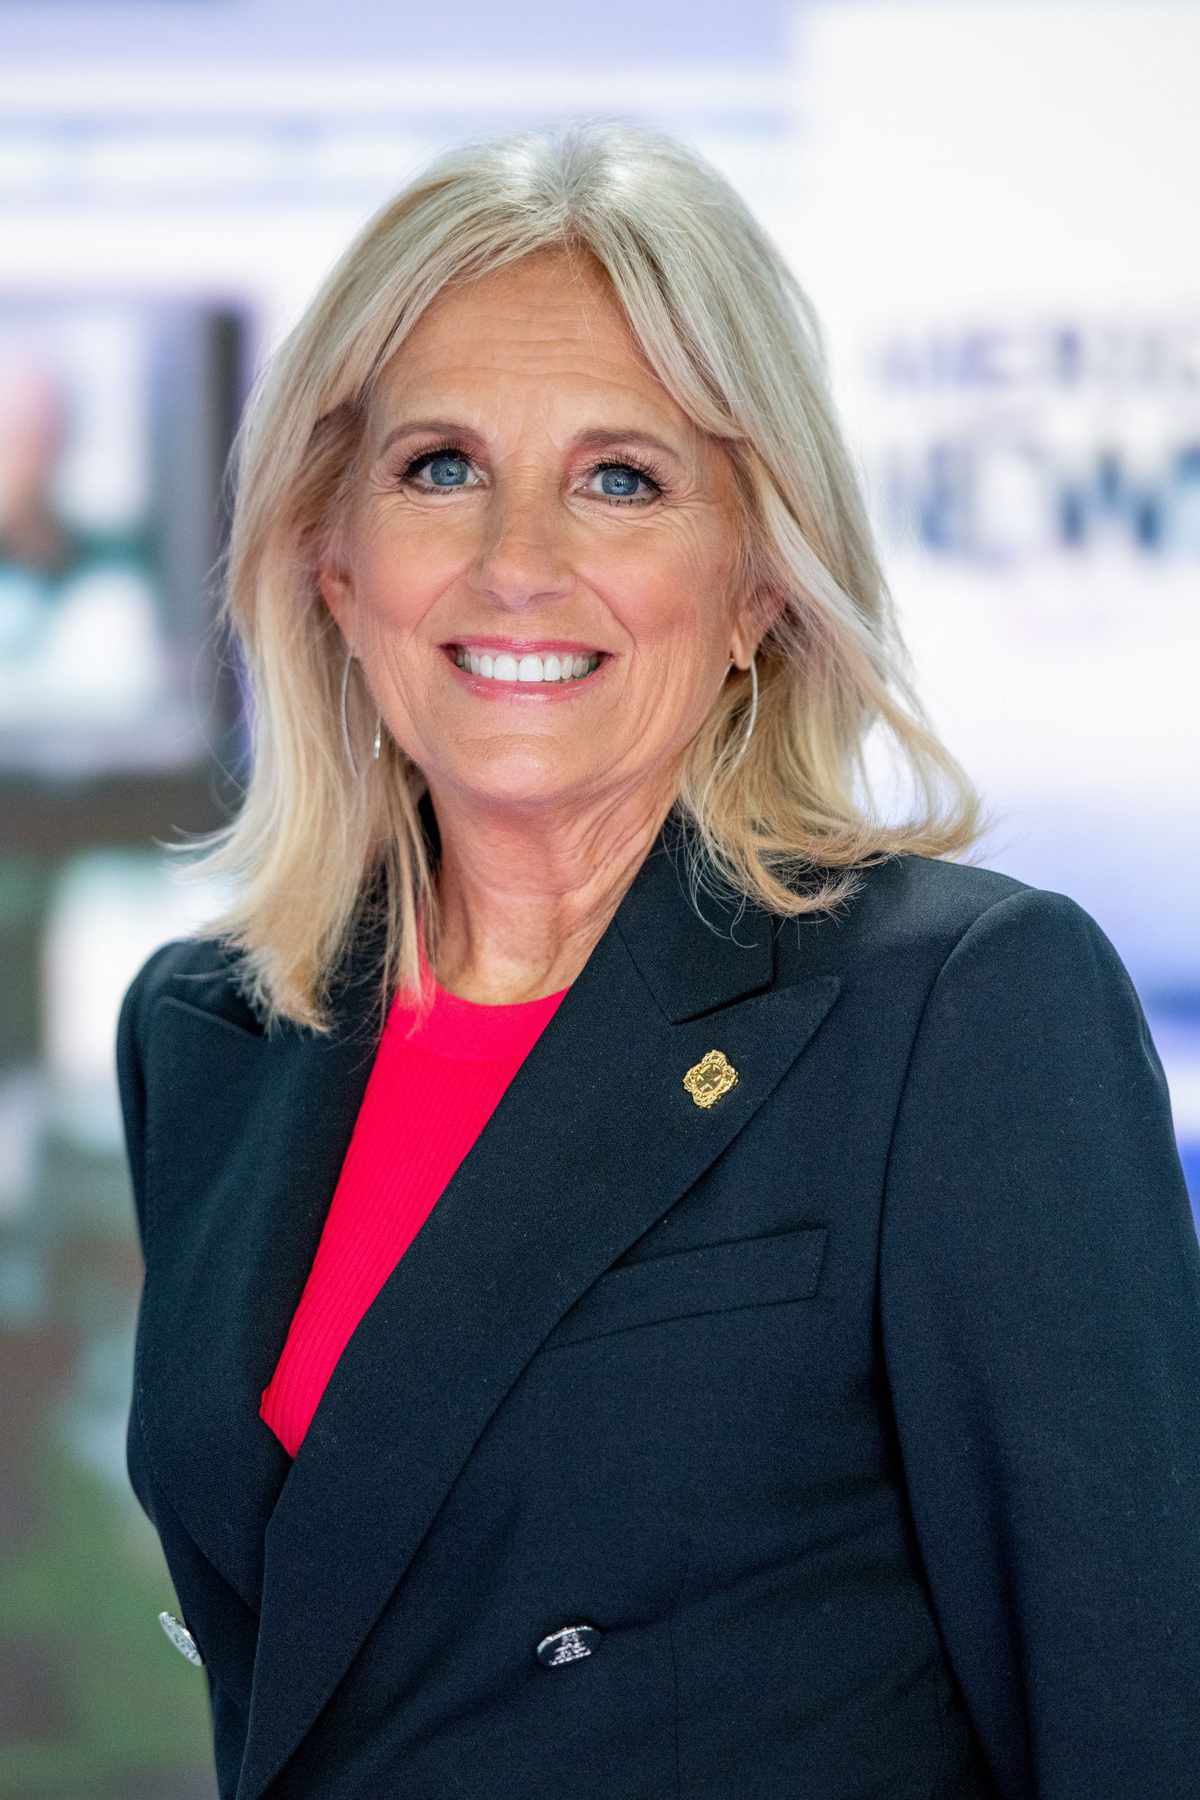 This Brightening Vitamin C Serum Is Responsible for ‘Improving Your Skincare at 50’ According to Jill Biden’s Makeup Artist